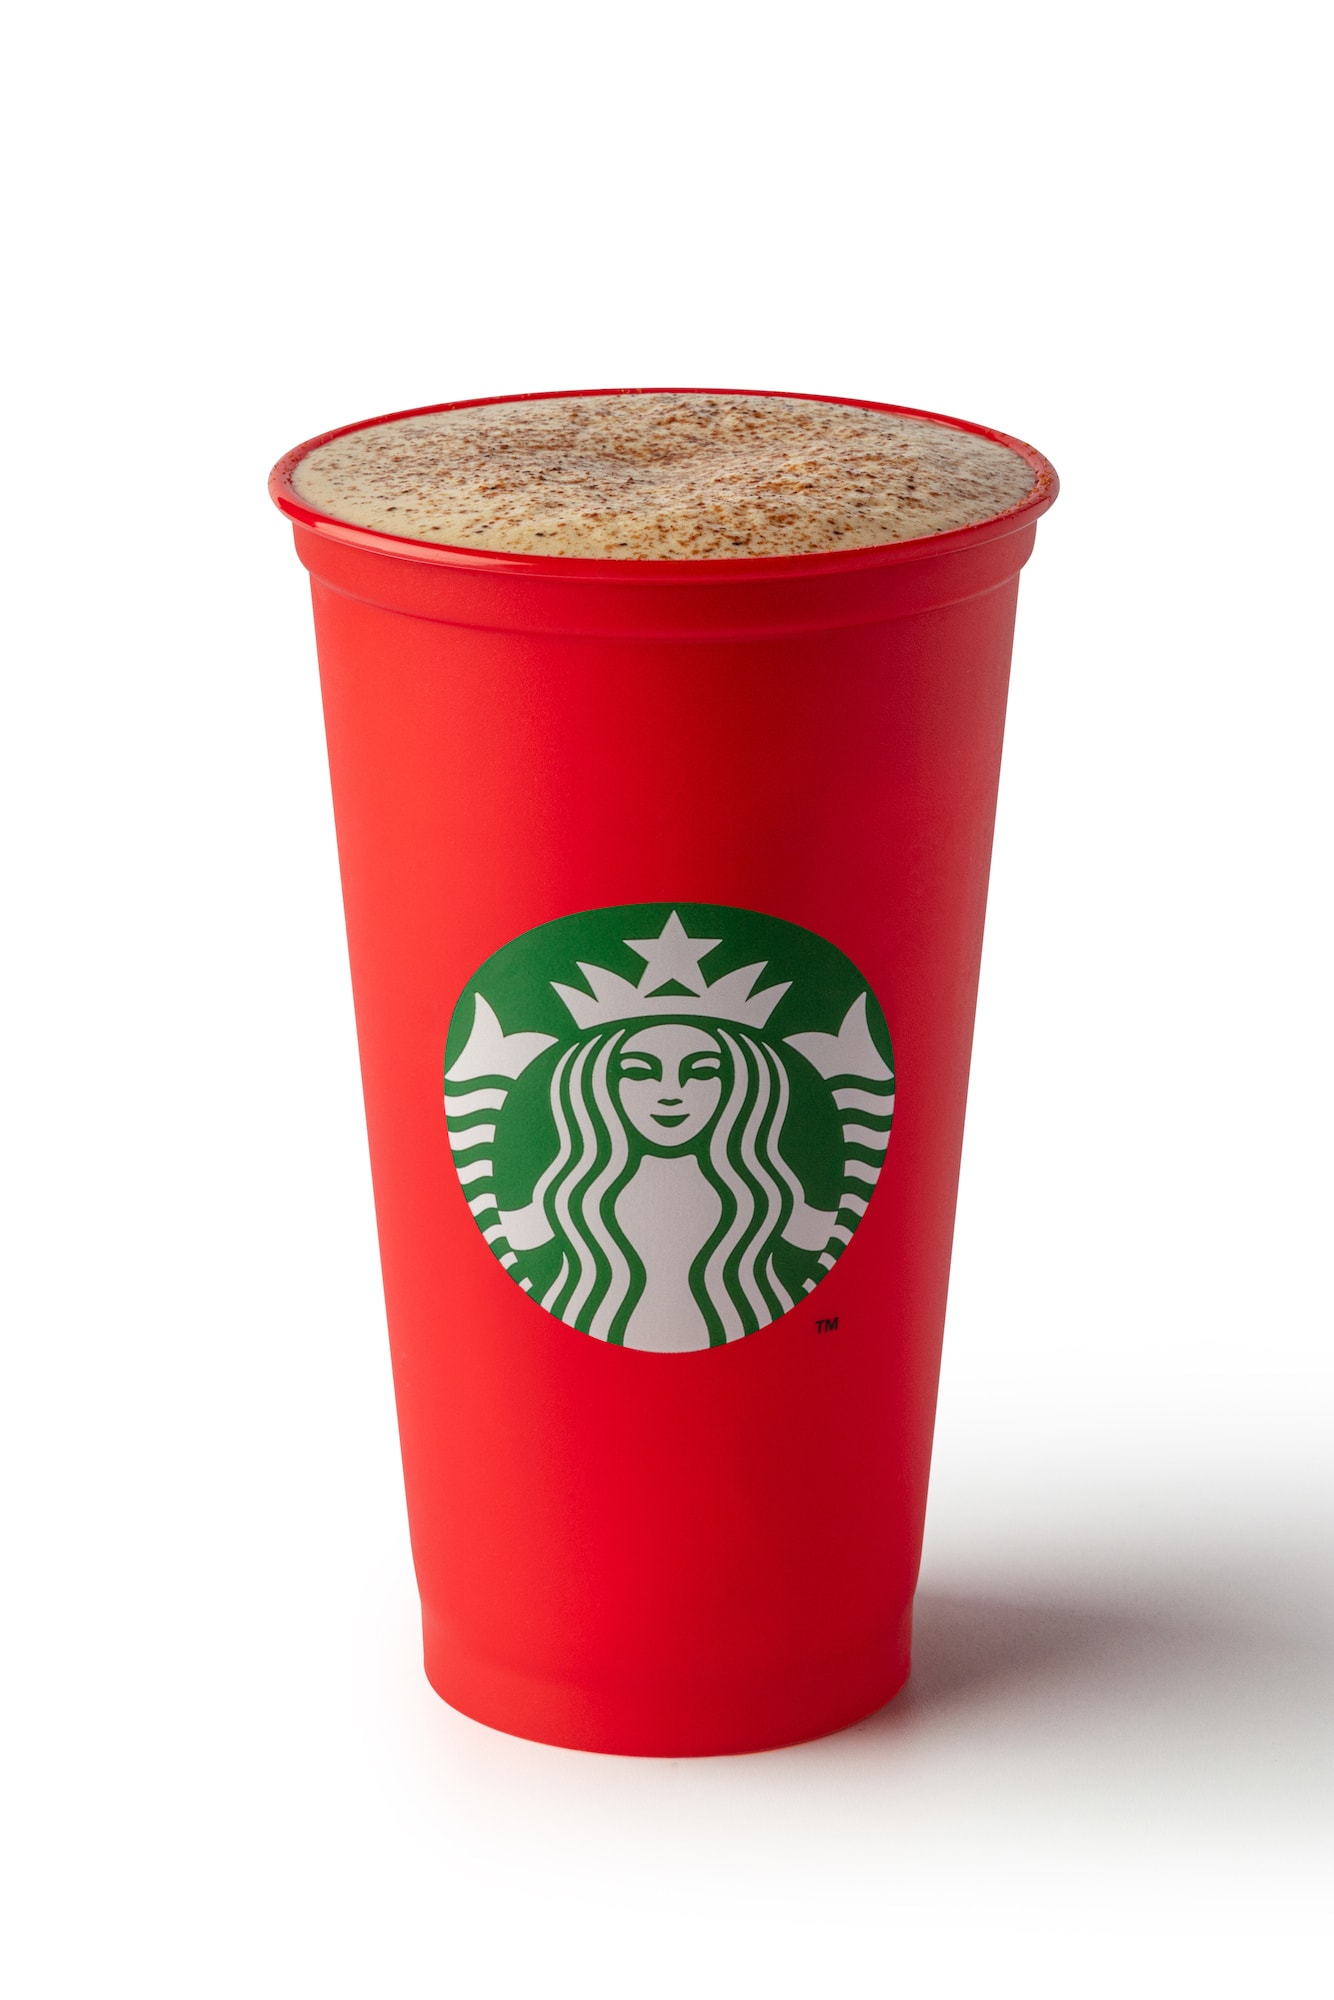 Starbucks Christmas Menu Drinks Eggnogg Toffee Nut Latte Beverages Hot Cold Frappuccino